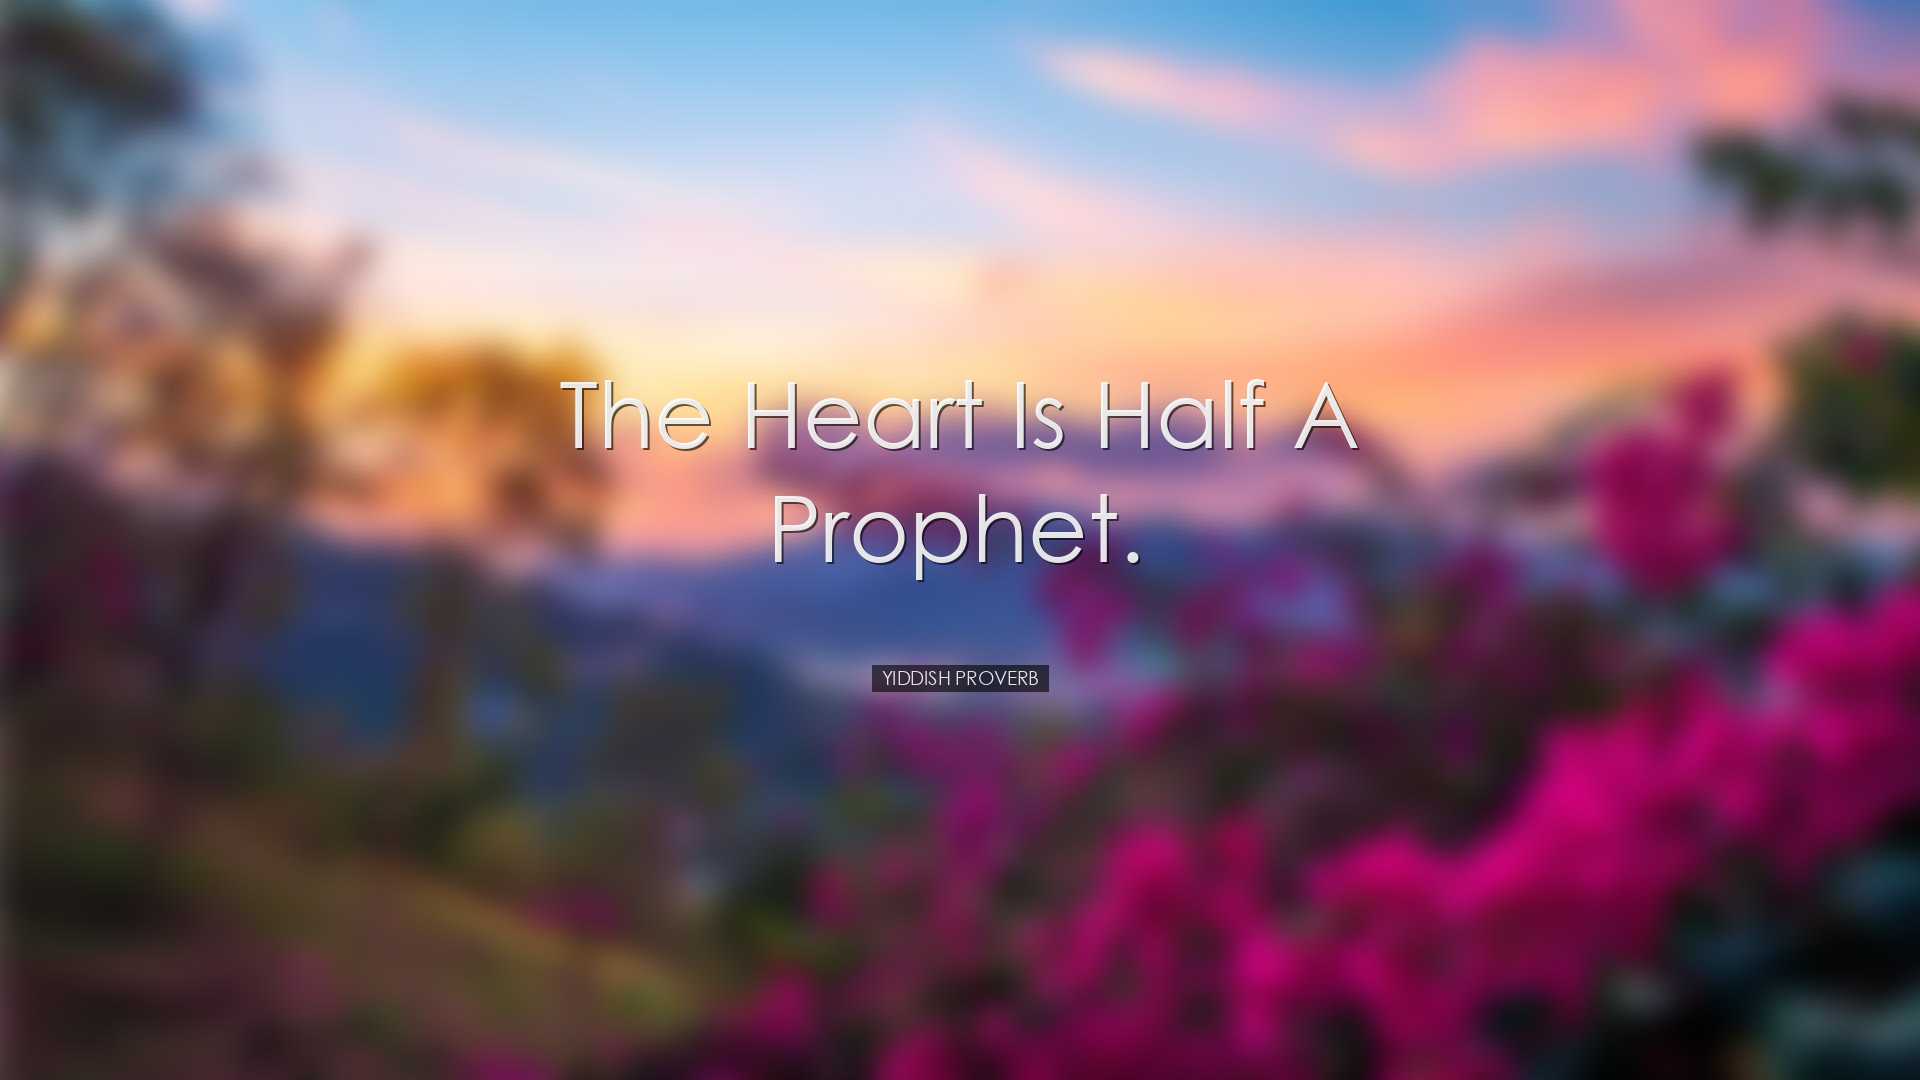 The heart is half a prophet. - Yiddish Proverb